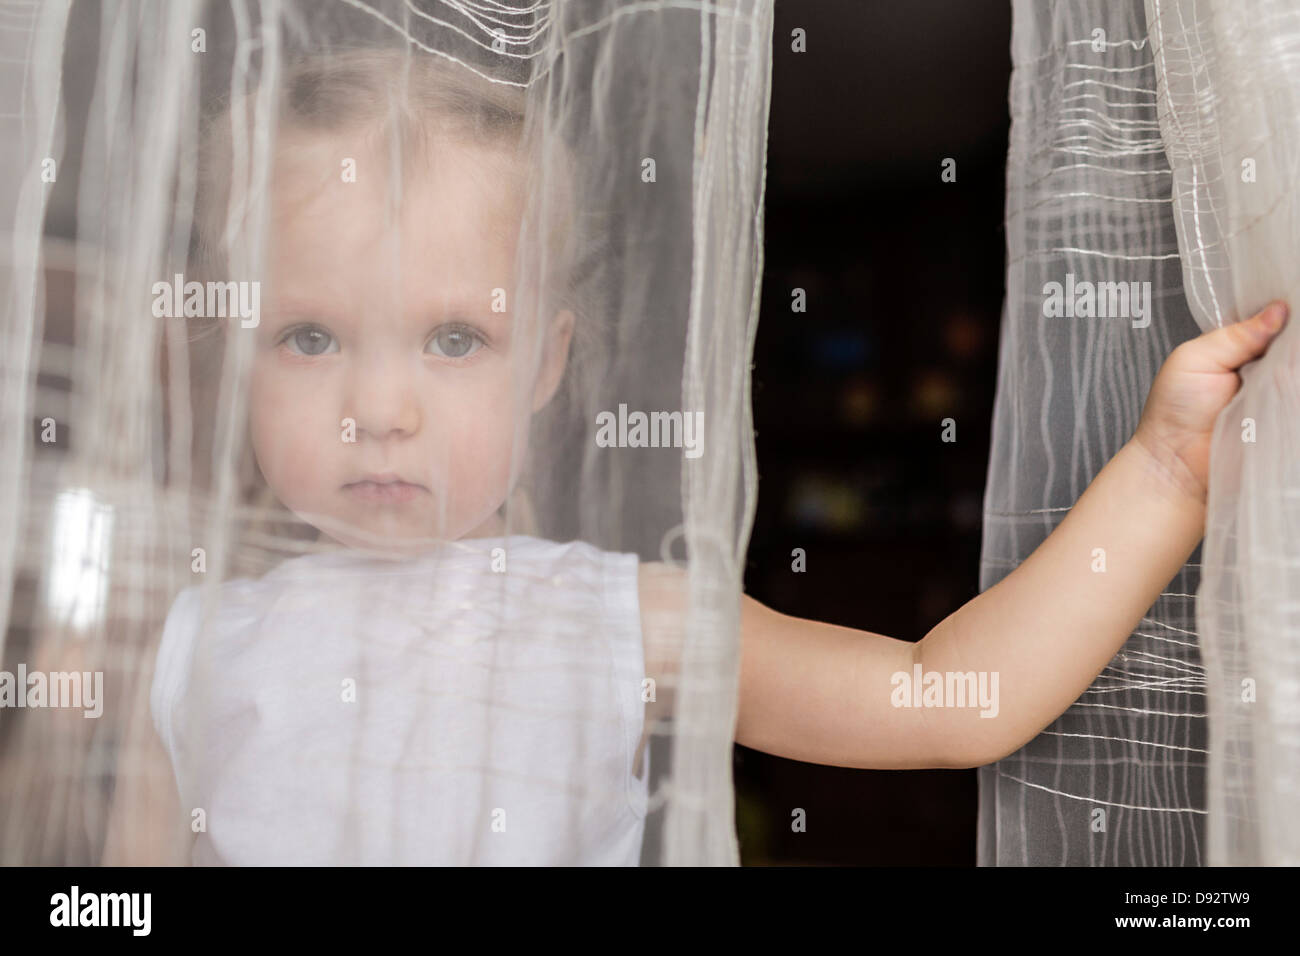 Girl staring behind translucent curtains Stock Photo